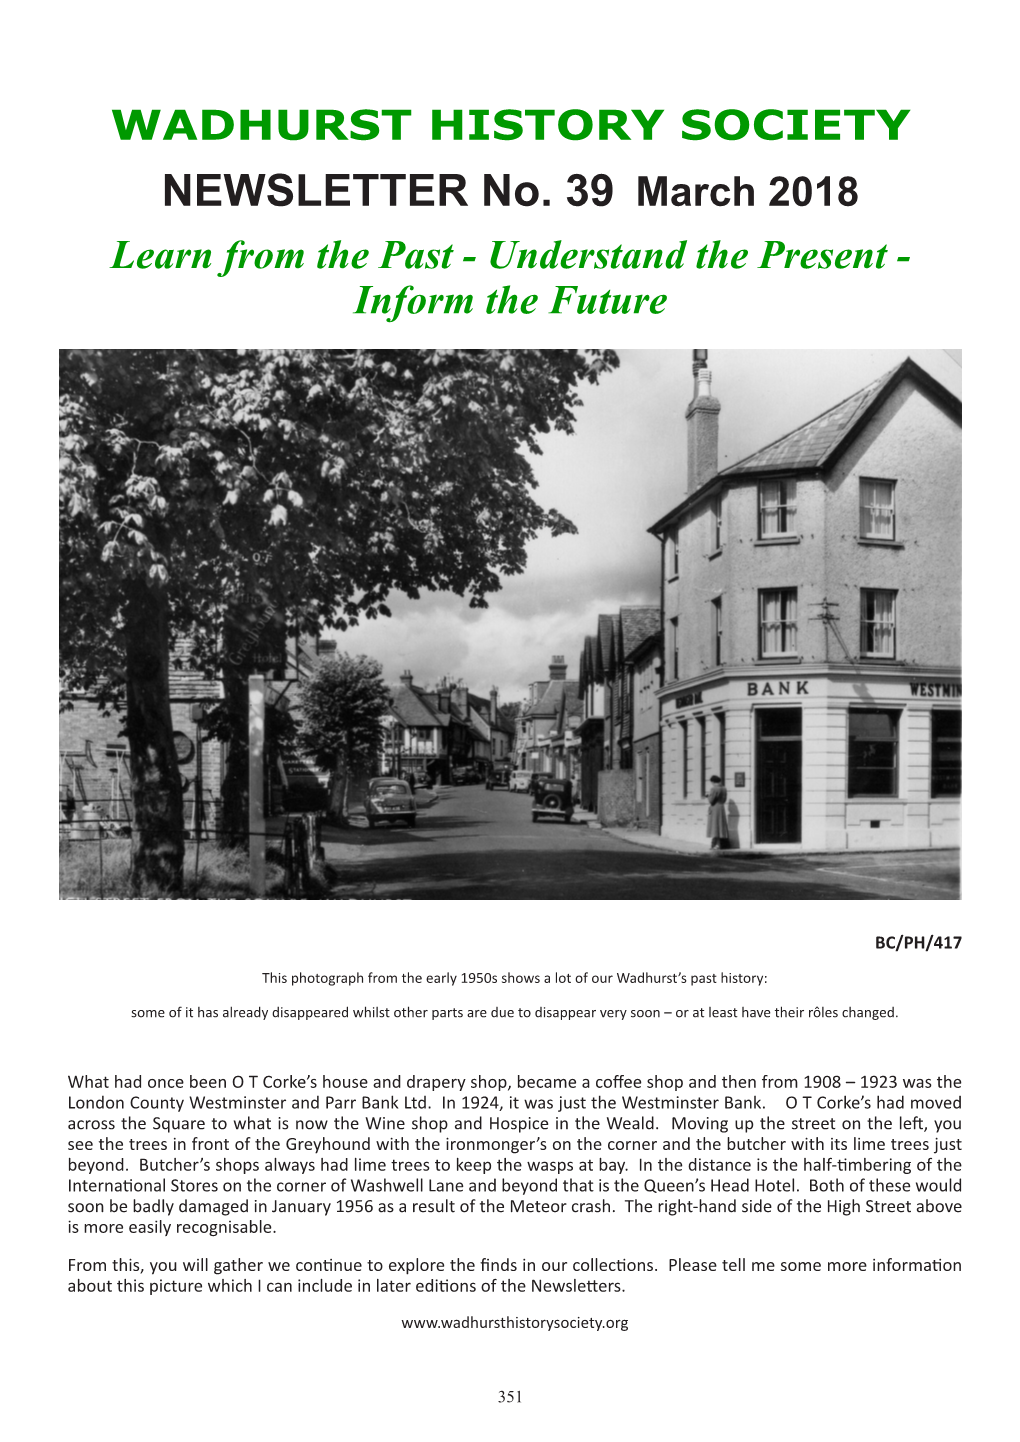 NEWSLETTER No. 39 March 2018 Learn from the Past - Understand the Present - Inform the Future